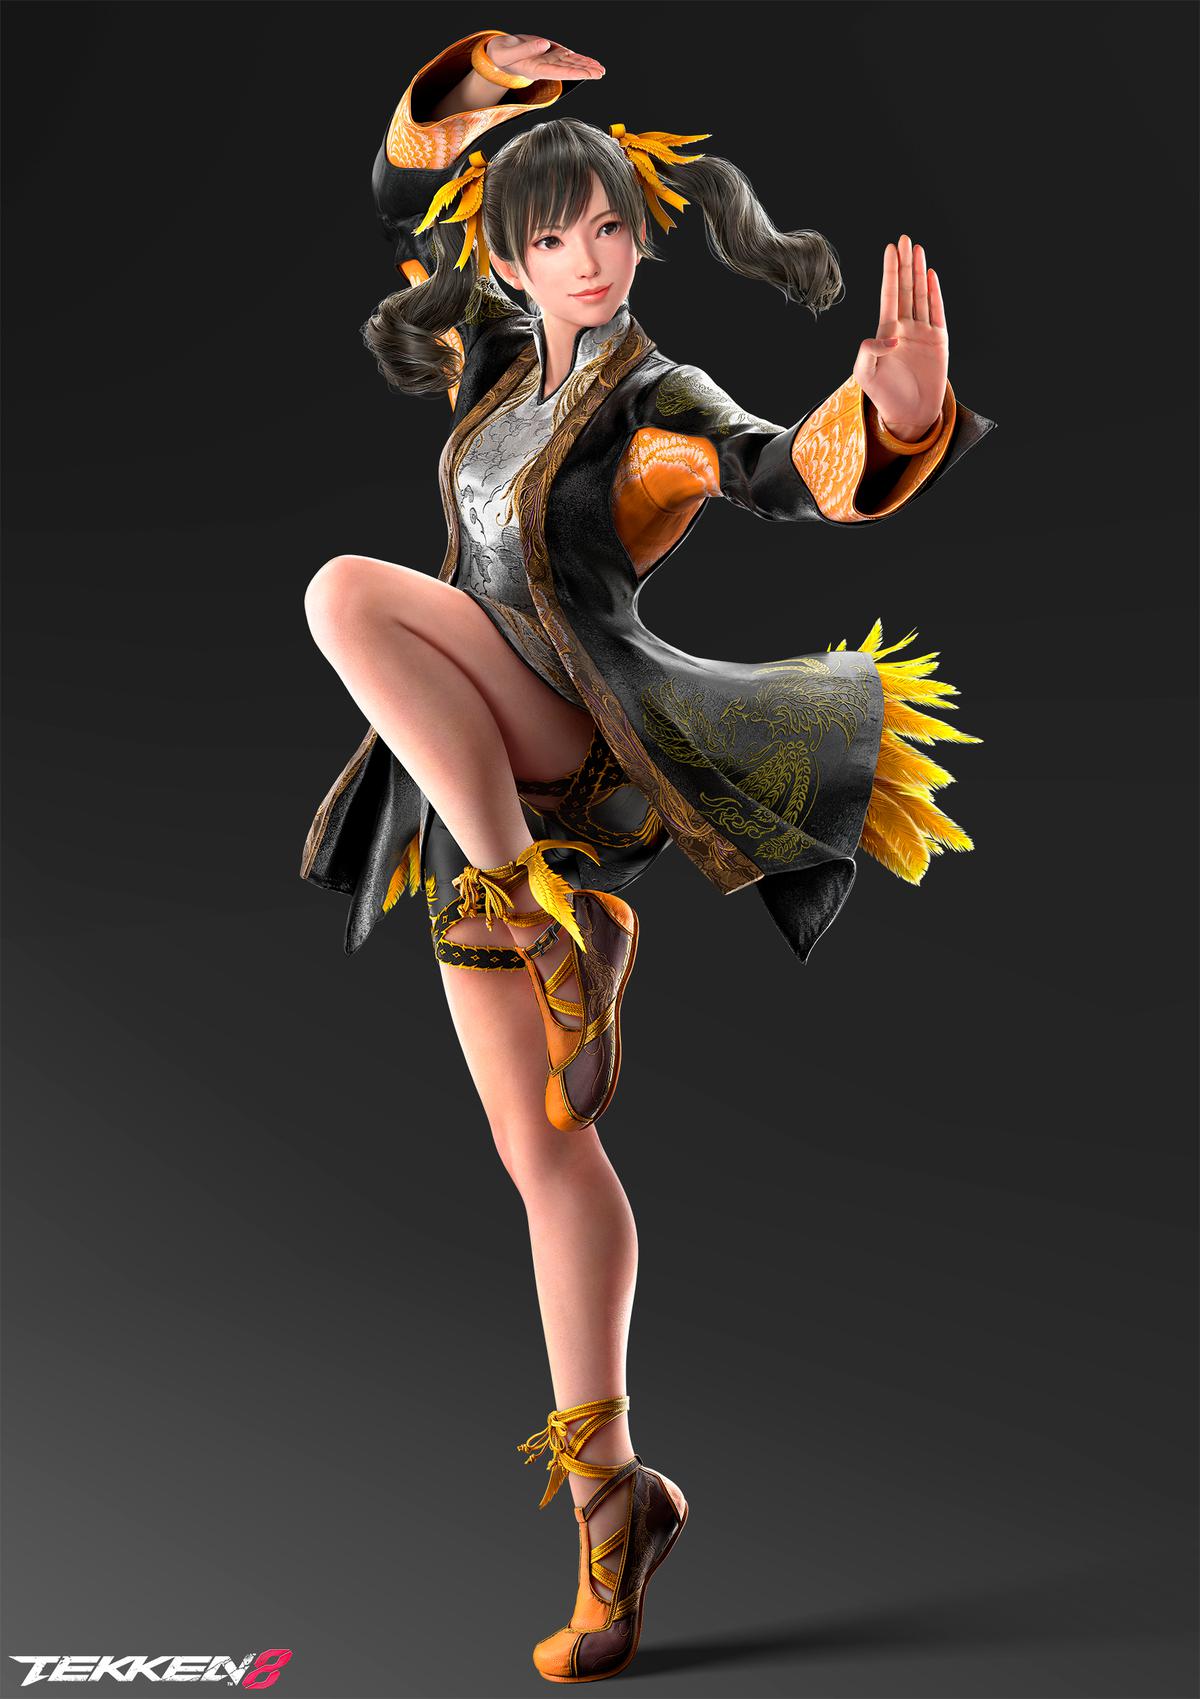 Scenes and players from Tekken 8 